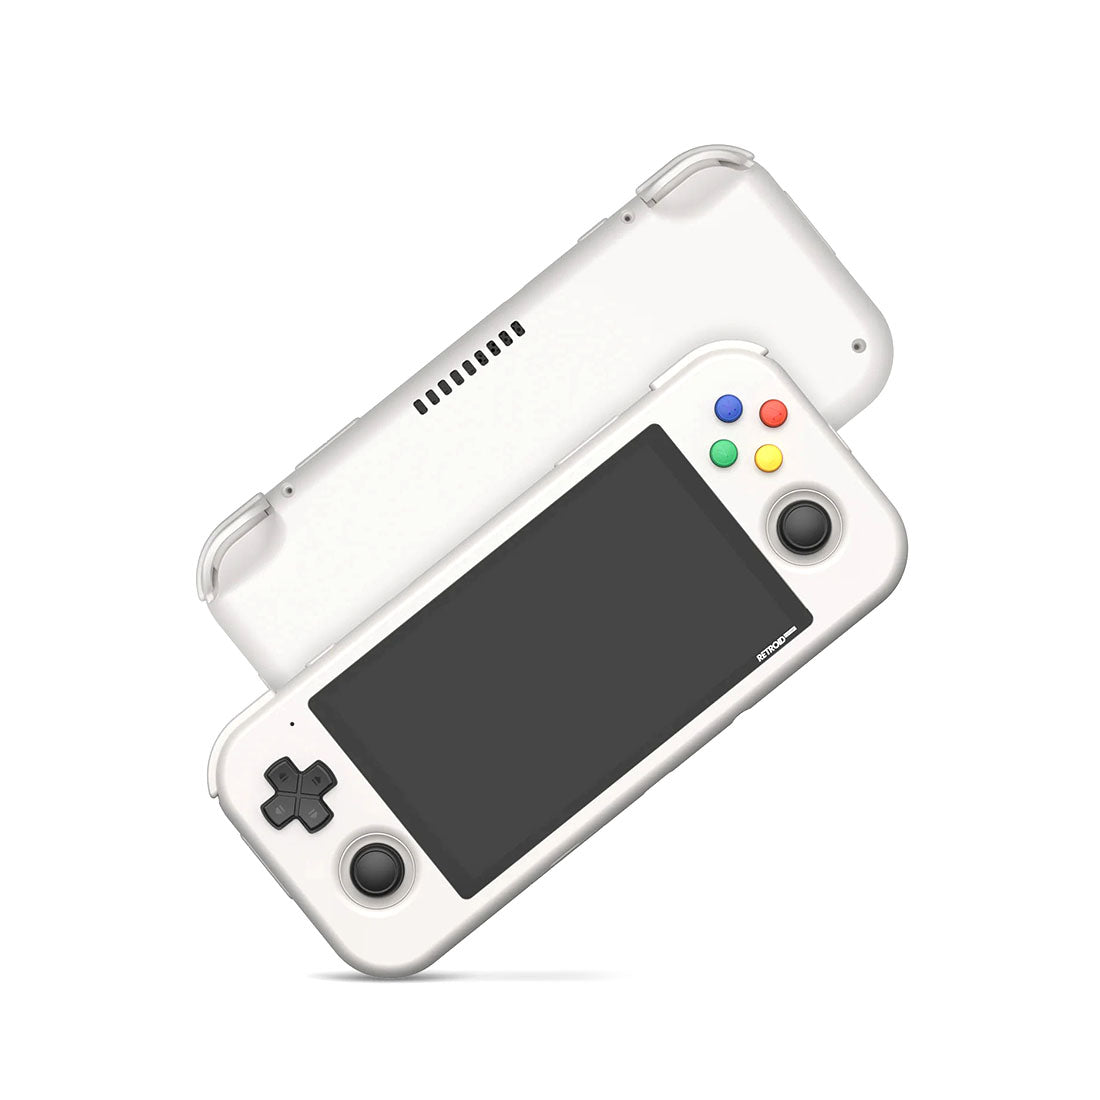 Retroid Pocket 3+ Android Handheld Game Console - Mechdiy